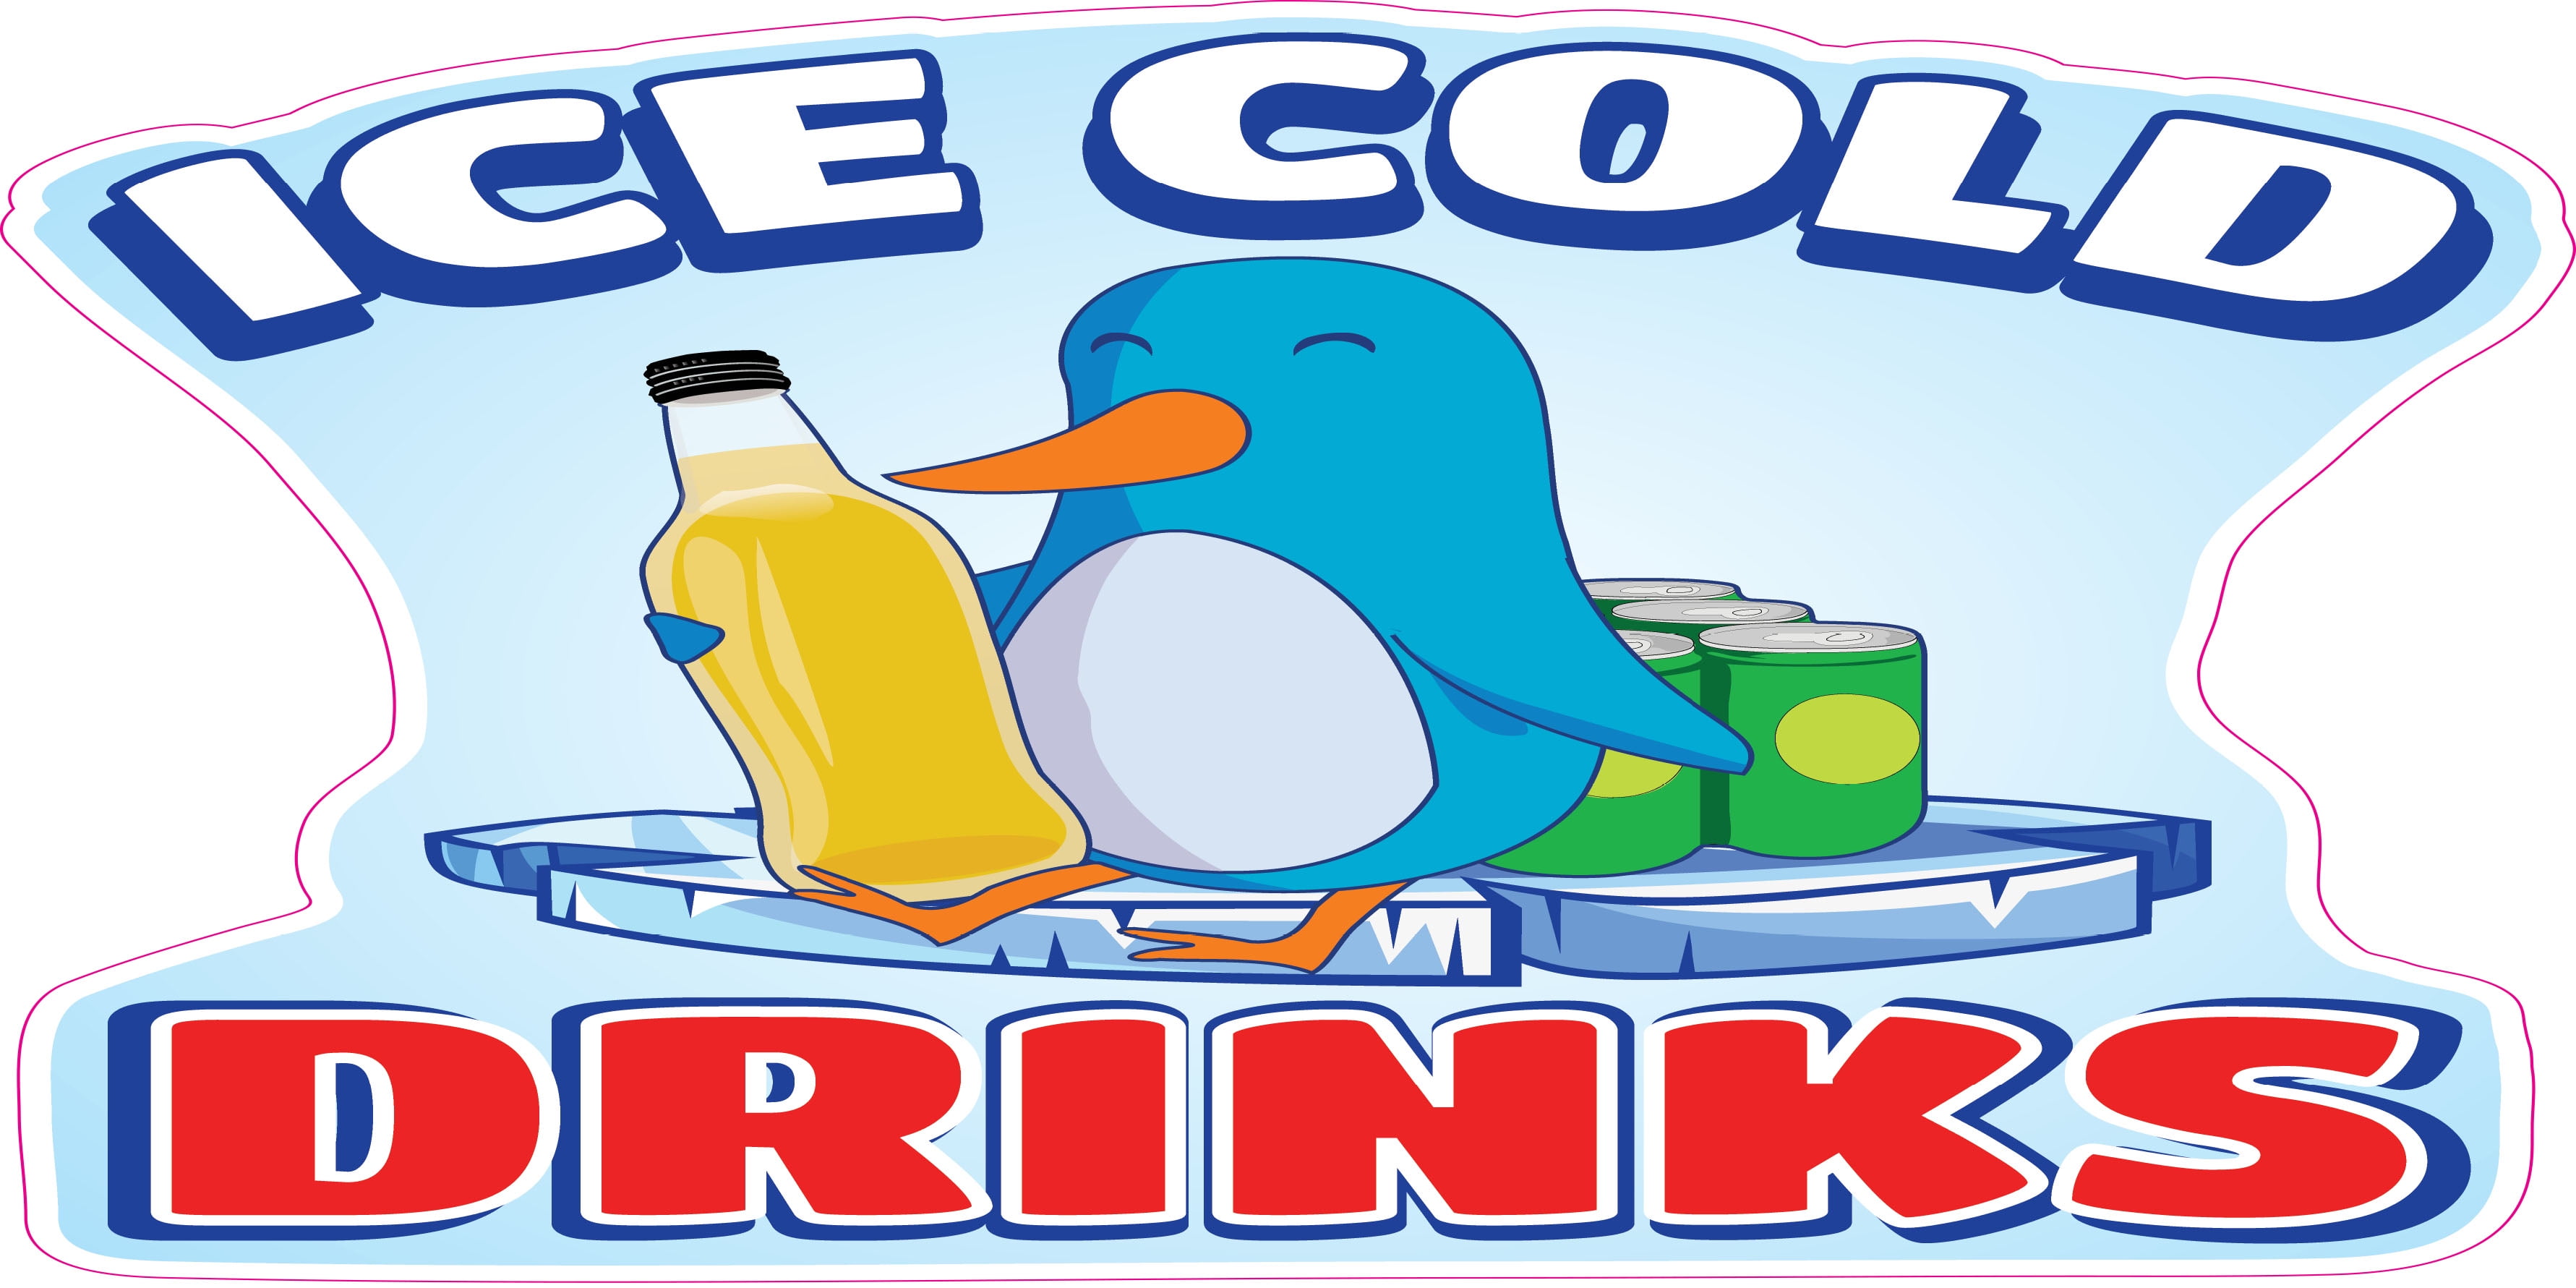 ICE Cold Drinks 3 8 Concession Decal Sign cart Trailer Stand Sticker Equipment 